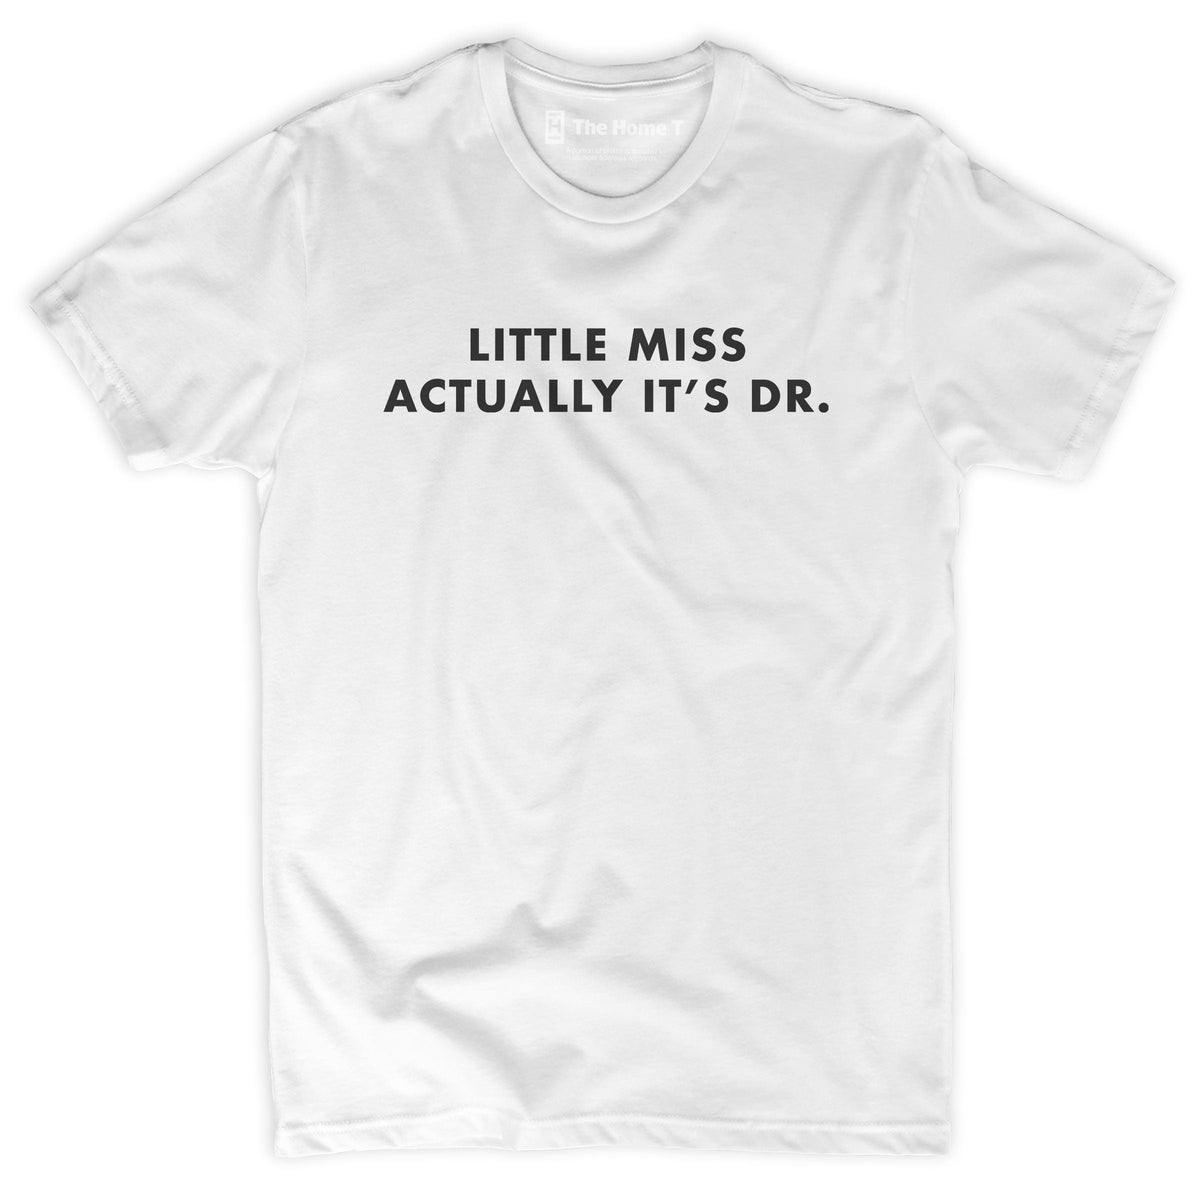 Little Miss Actually It's Dr.